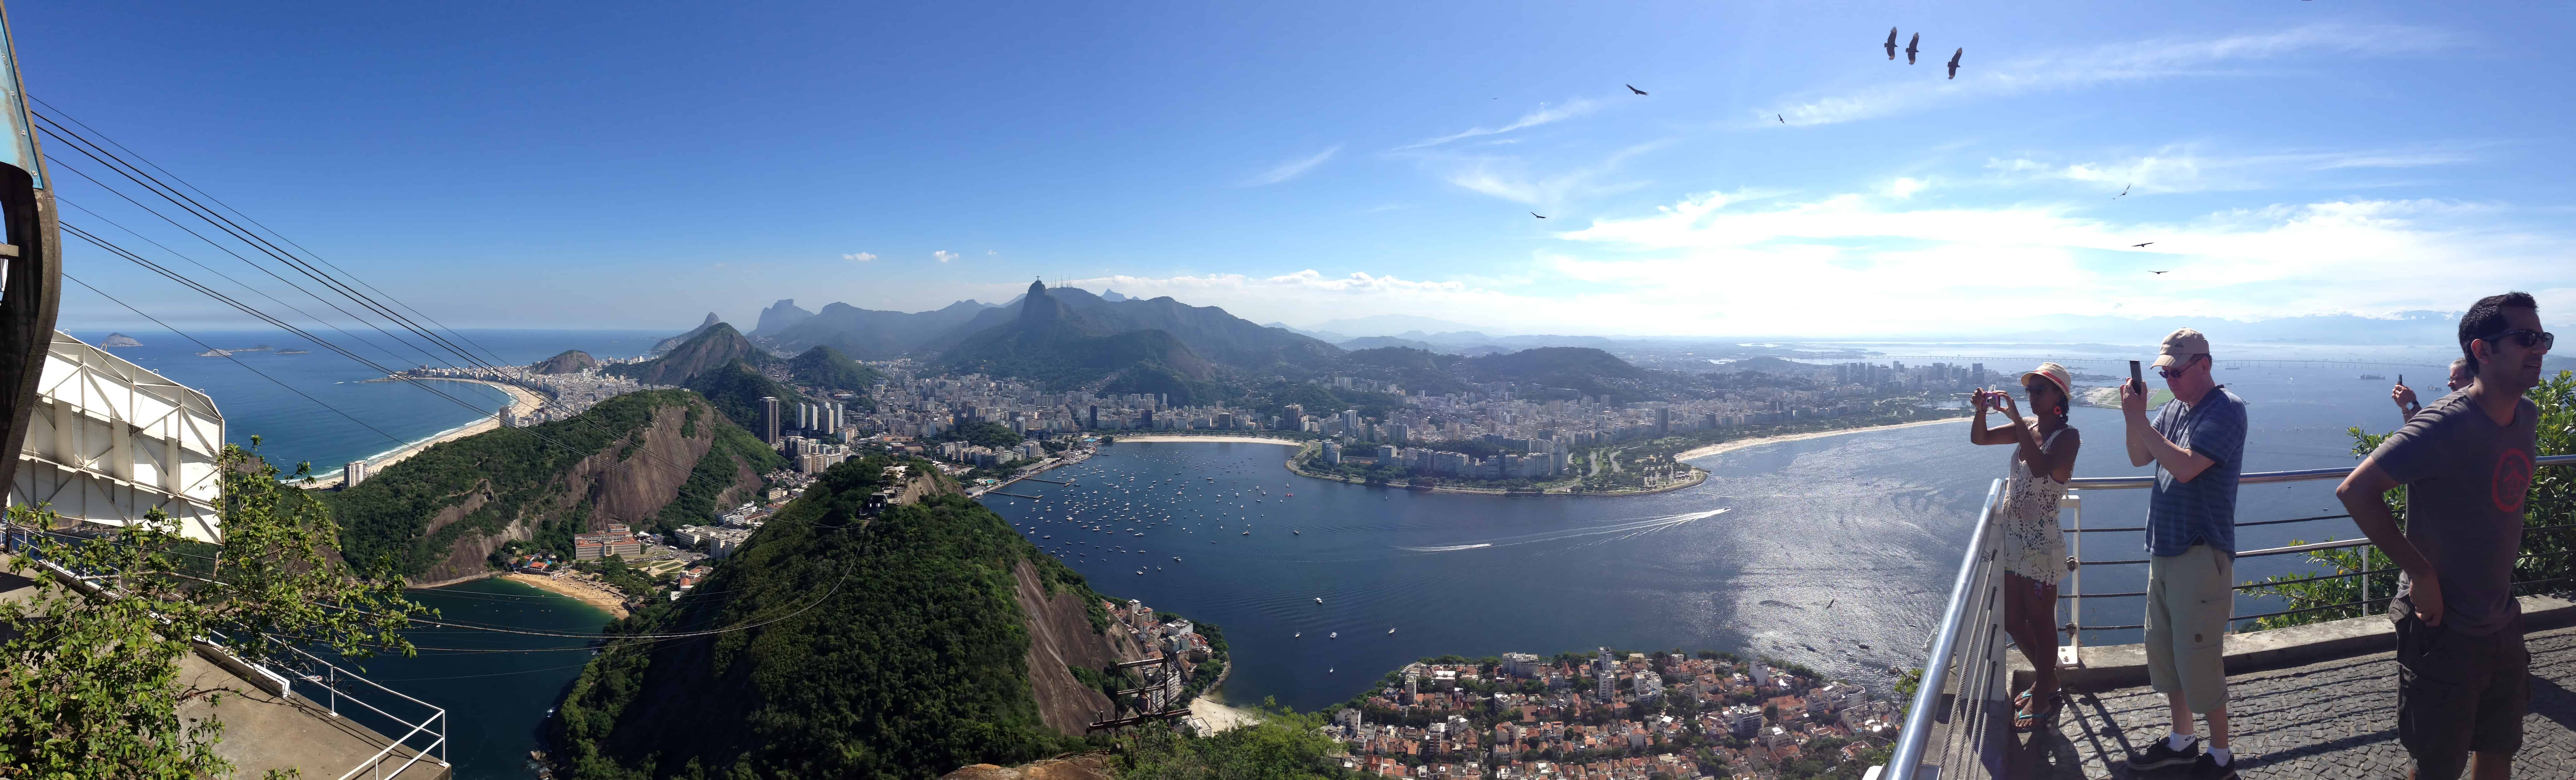 Panoramic view from Sugarloaf Mountain in Rio de Janeiro, Brazil